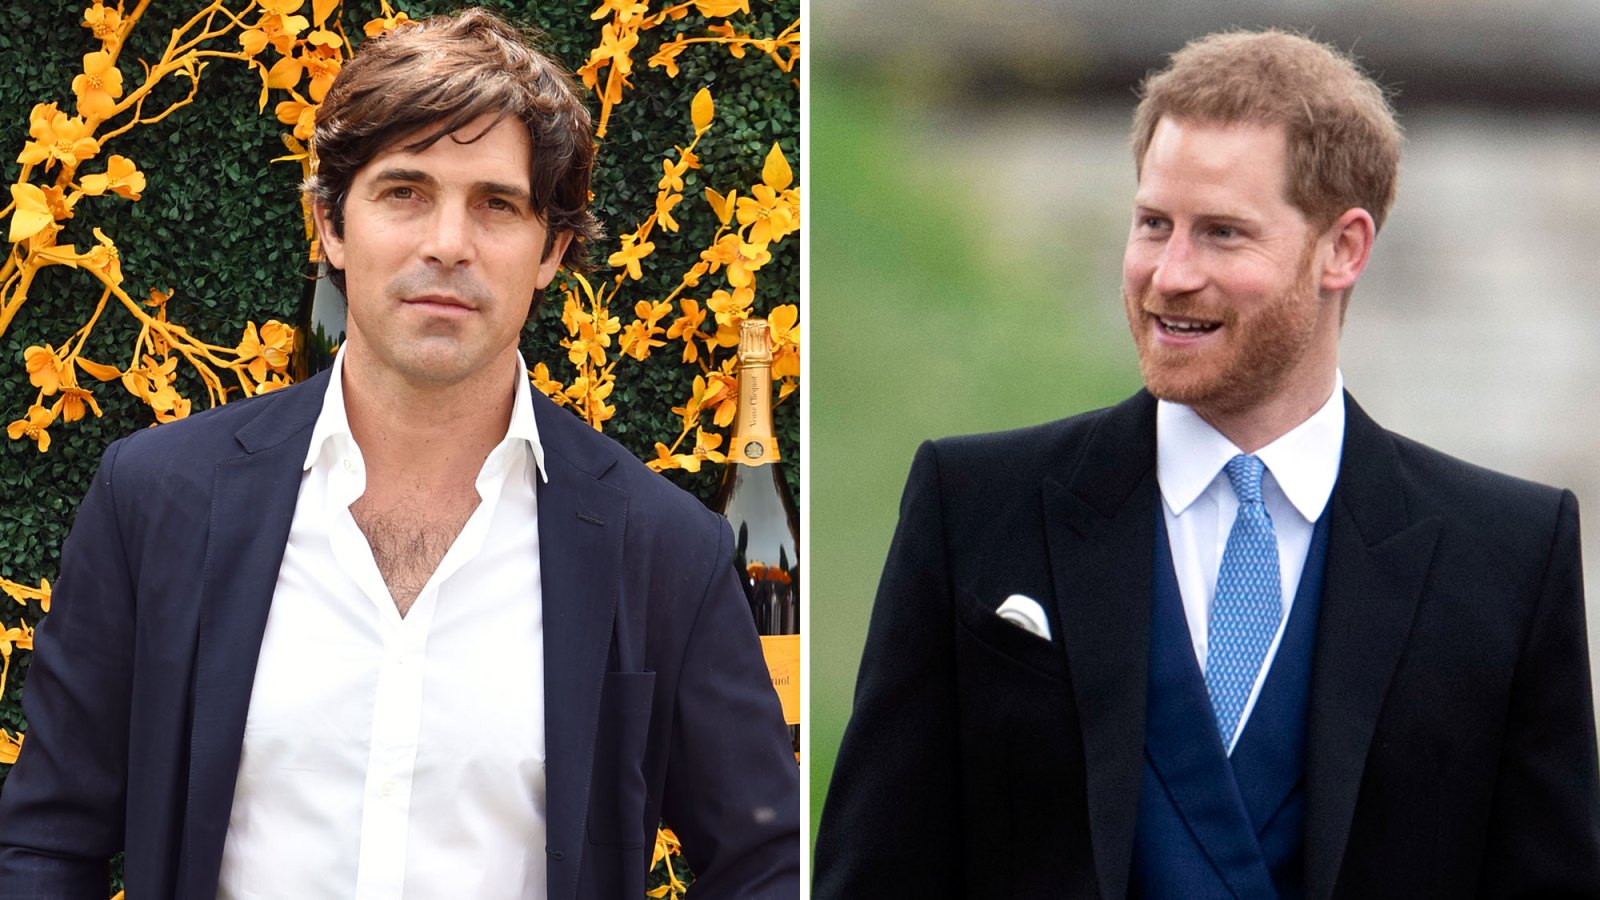 Nacho Figueras Say's He's Inspired by Prince Harry, Has Met 'Amazing' Baby Archie